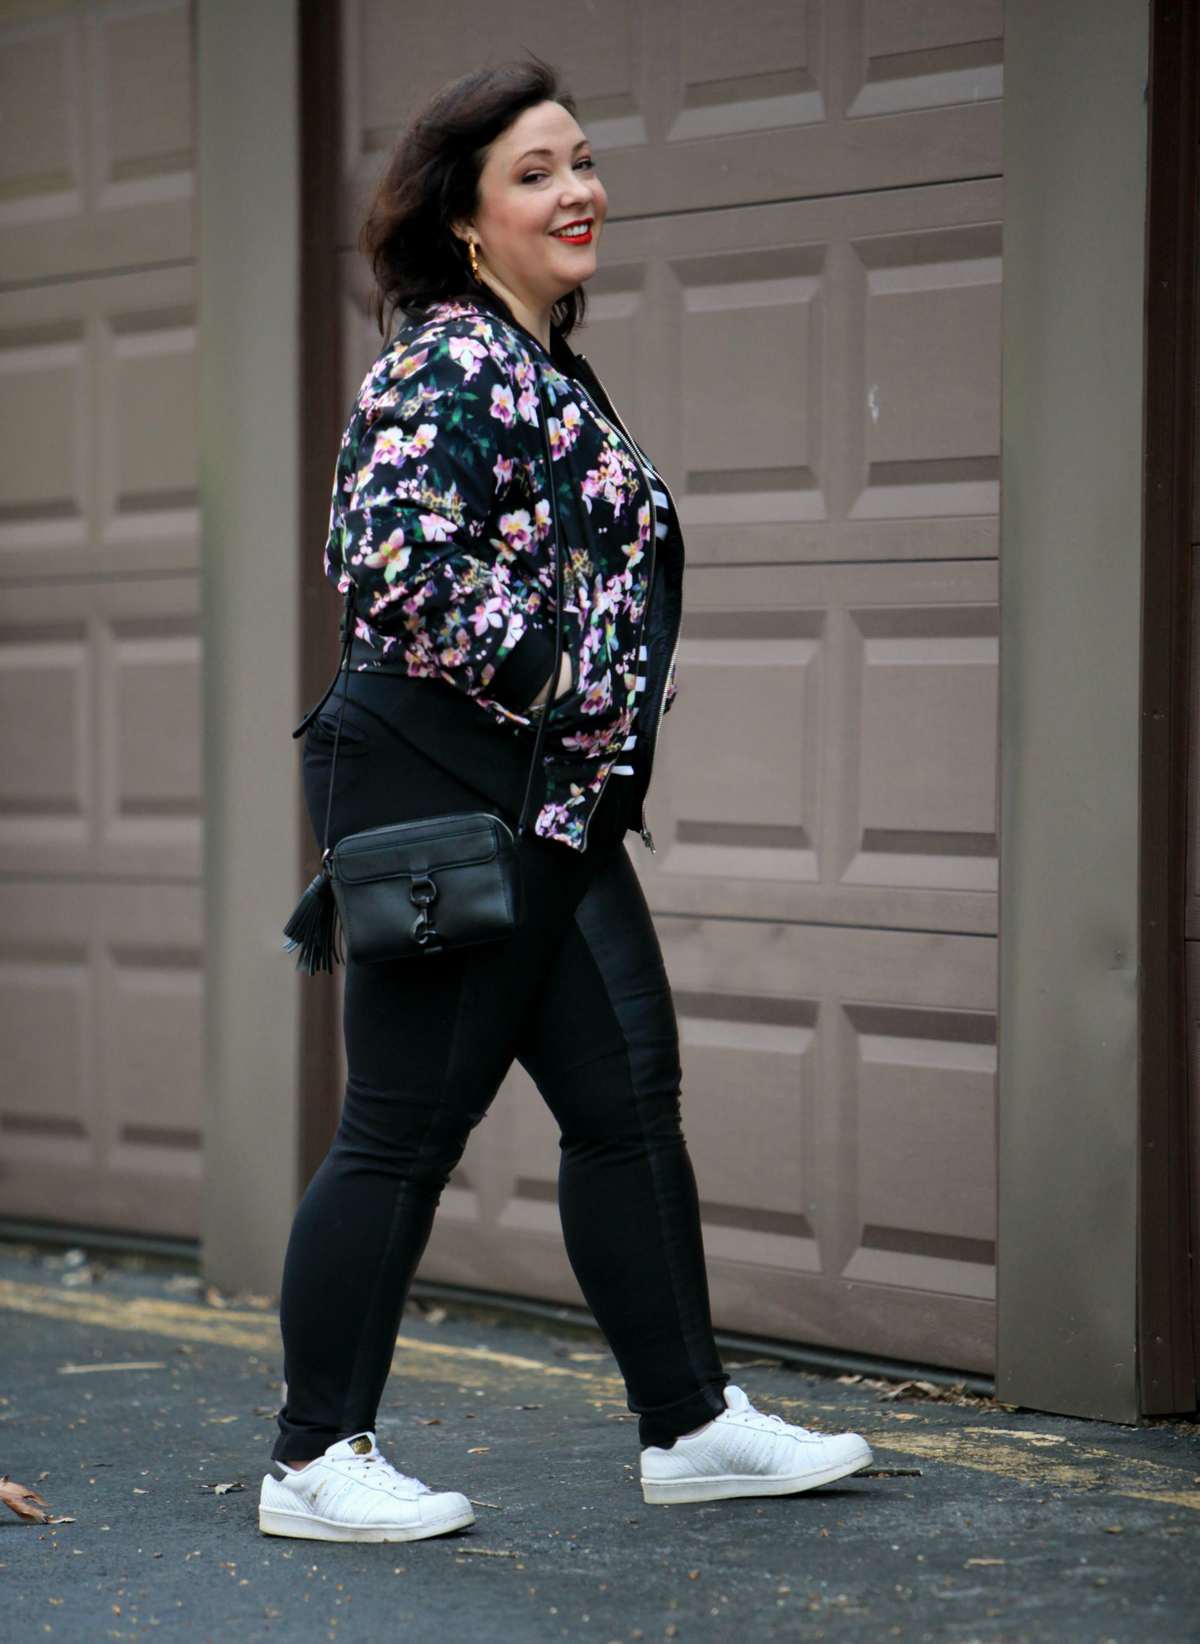 Wardrobe Oxygen, over 40 fashion blogger in floral bomber from Gwynnie Bee and faux leather front ponte pants